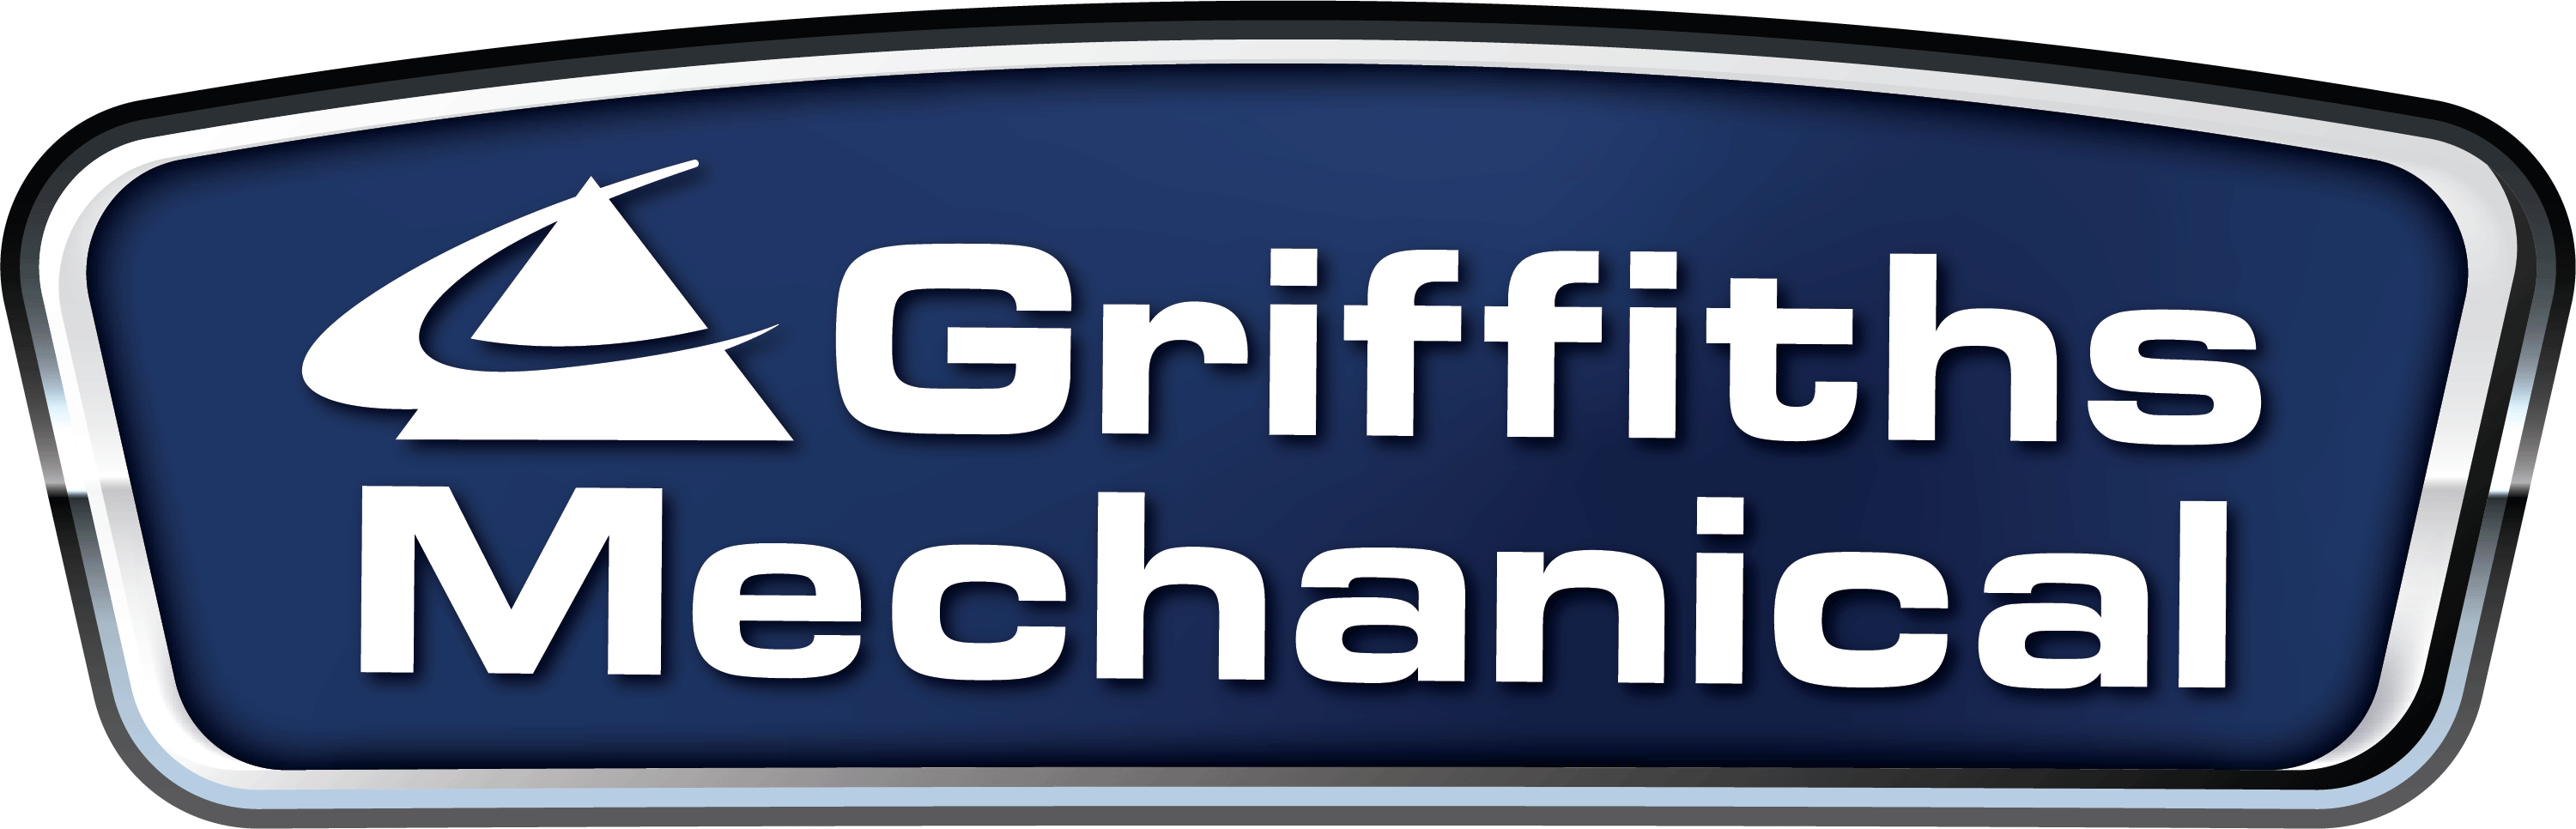 Griffiths Mechanical